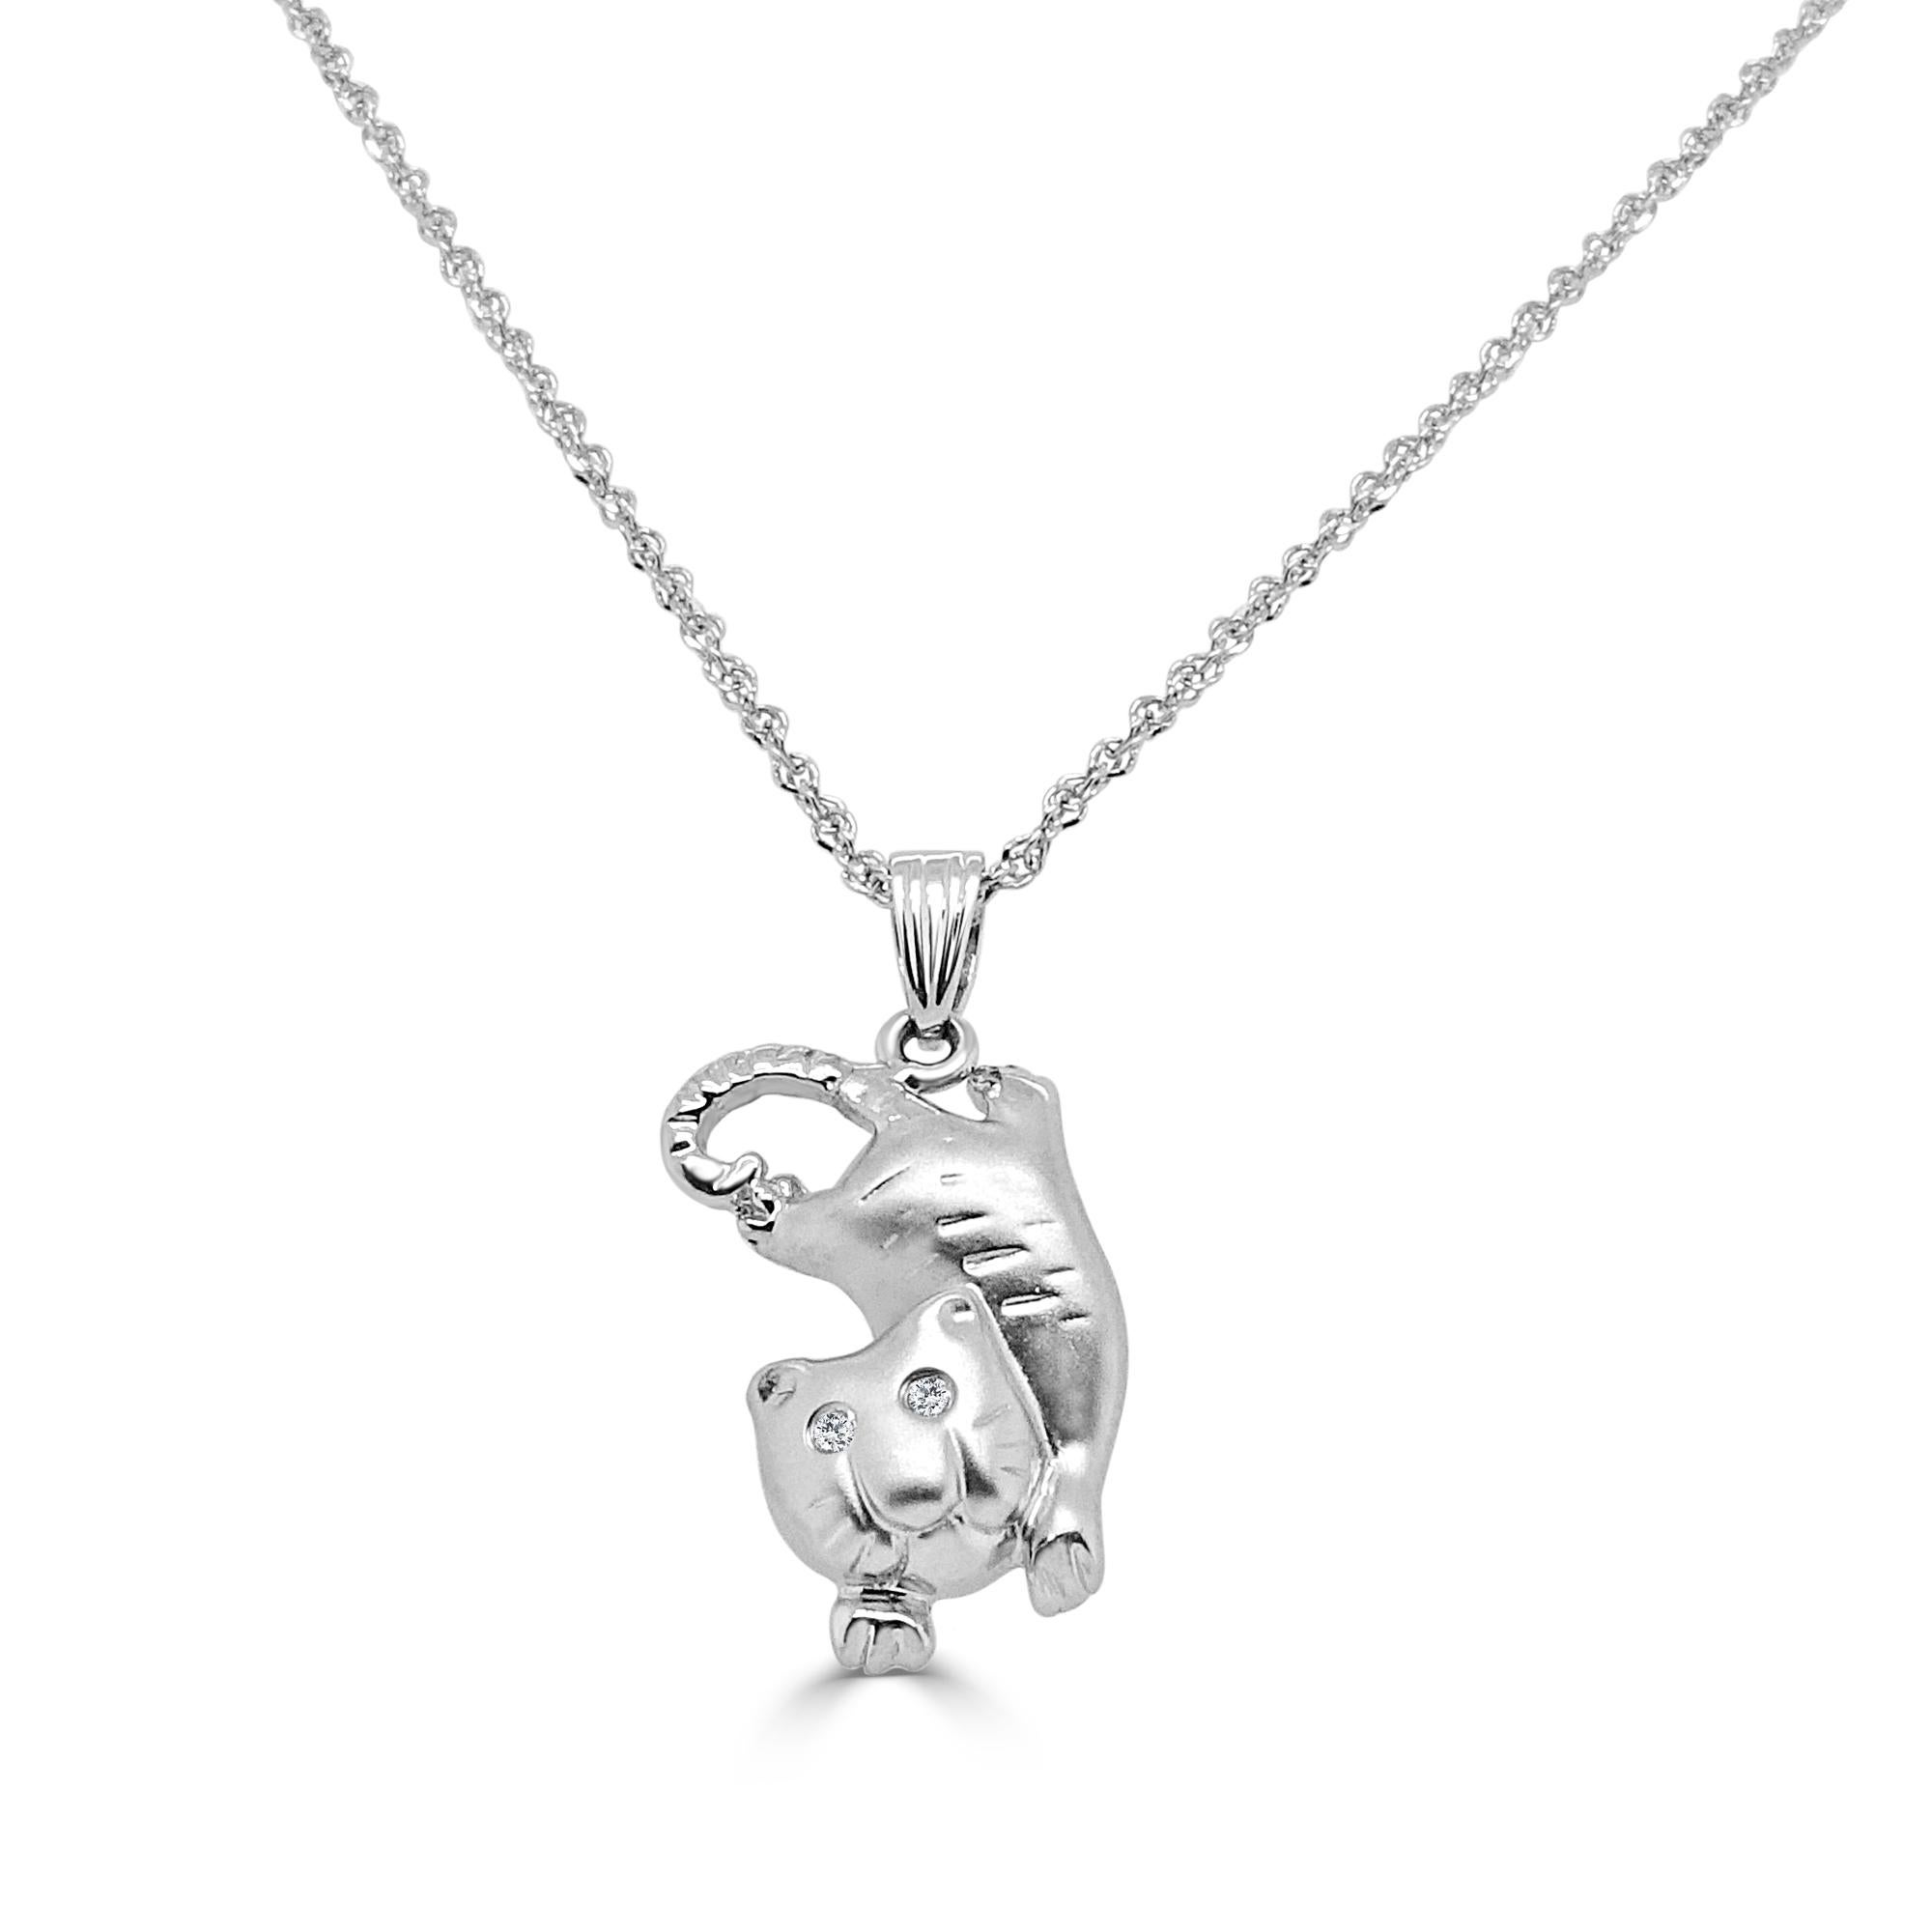 18 Karat white gold ladies necklace with pendant in the shape of a cat.Gentle and elegant pendant is crafted in a sleek white gold. Featuring round cut diamonds, together totaling 0.01 TCW . Suspended from a 16-inch stunning non-tangle, non slip